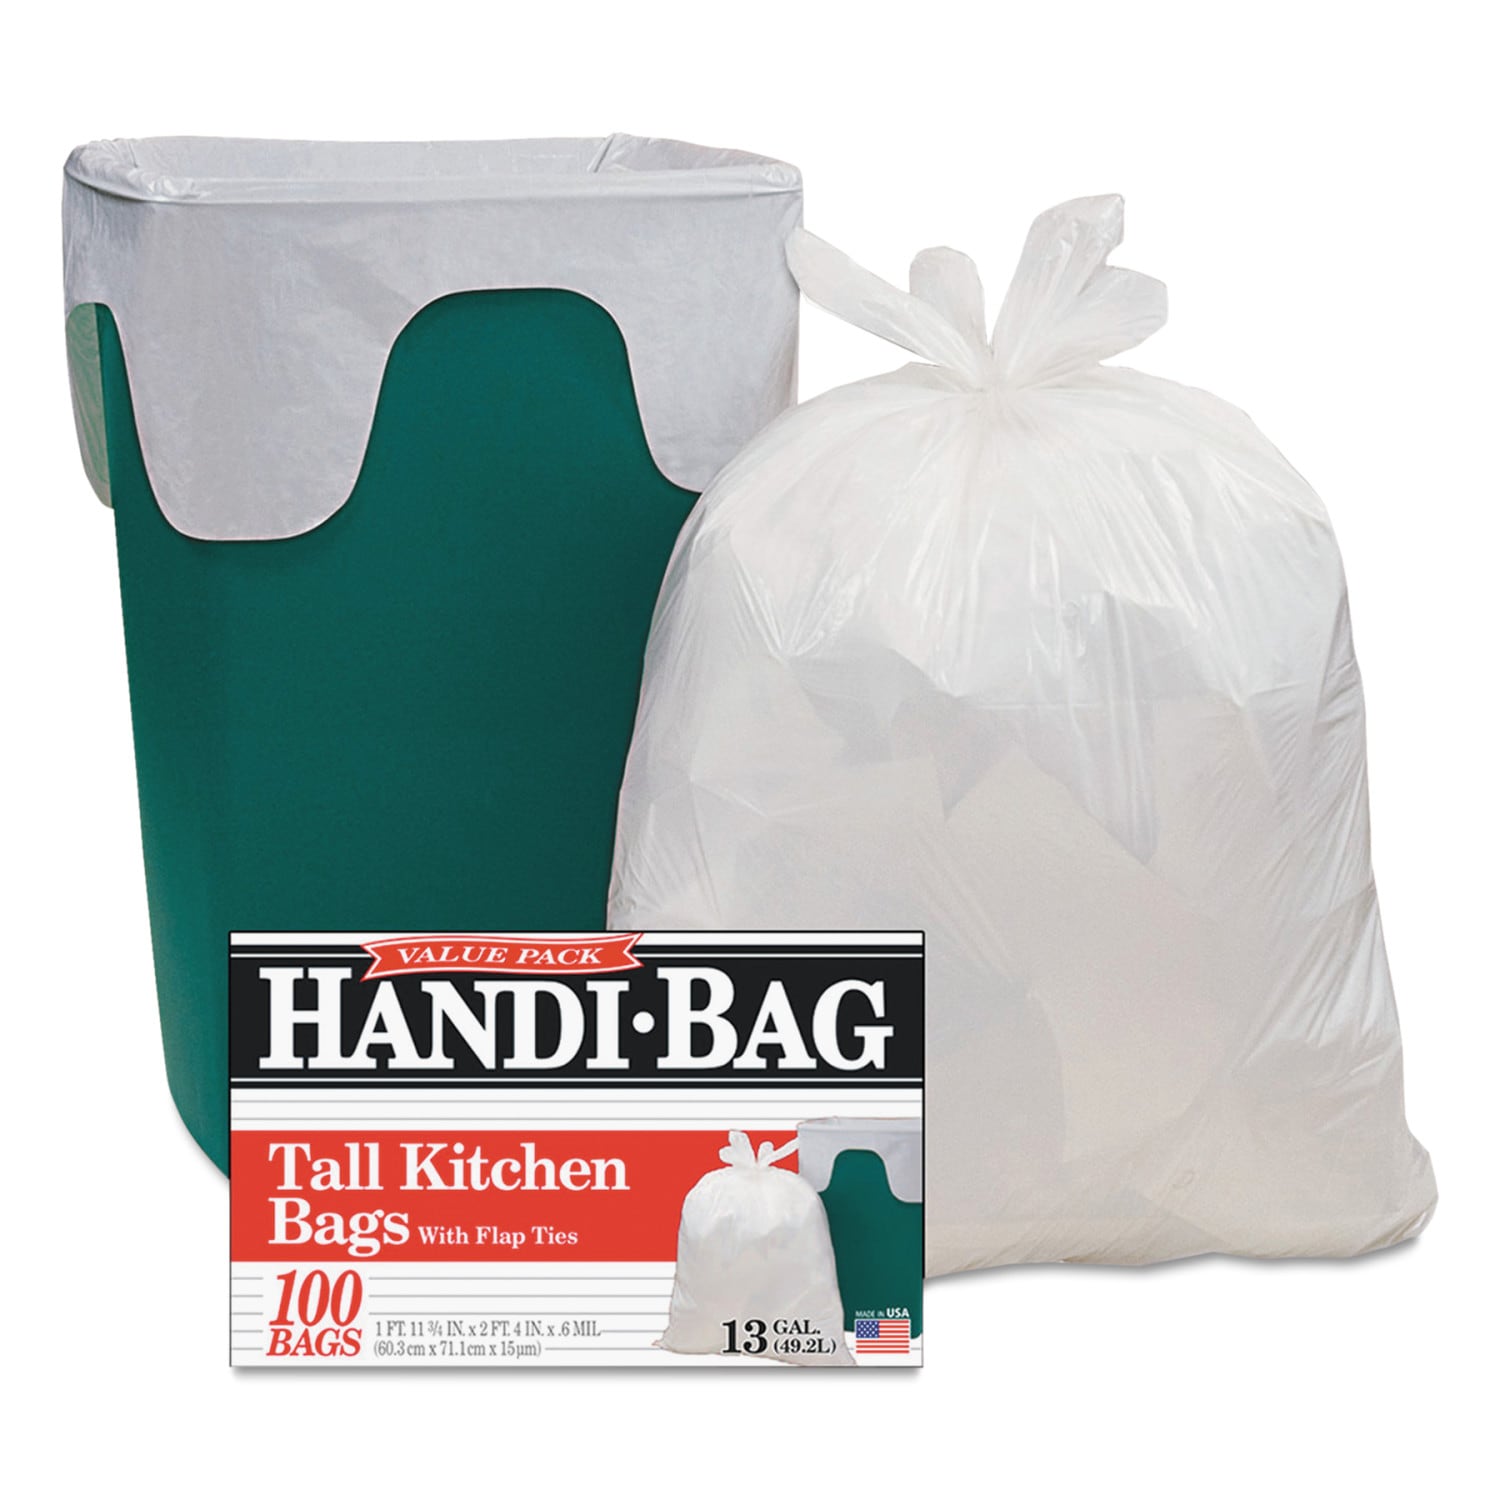 Brand New Hefty Baggies Gallon Sized with Ties 50 ct to 500 ct